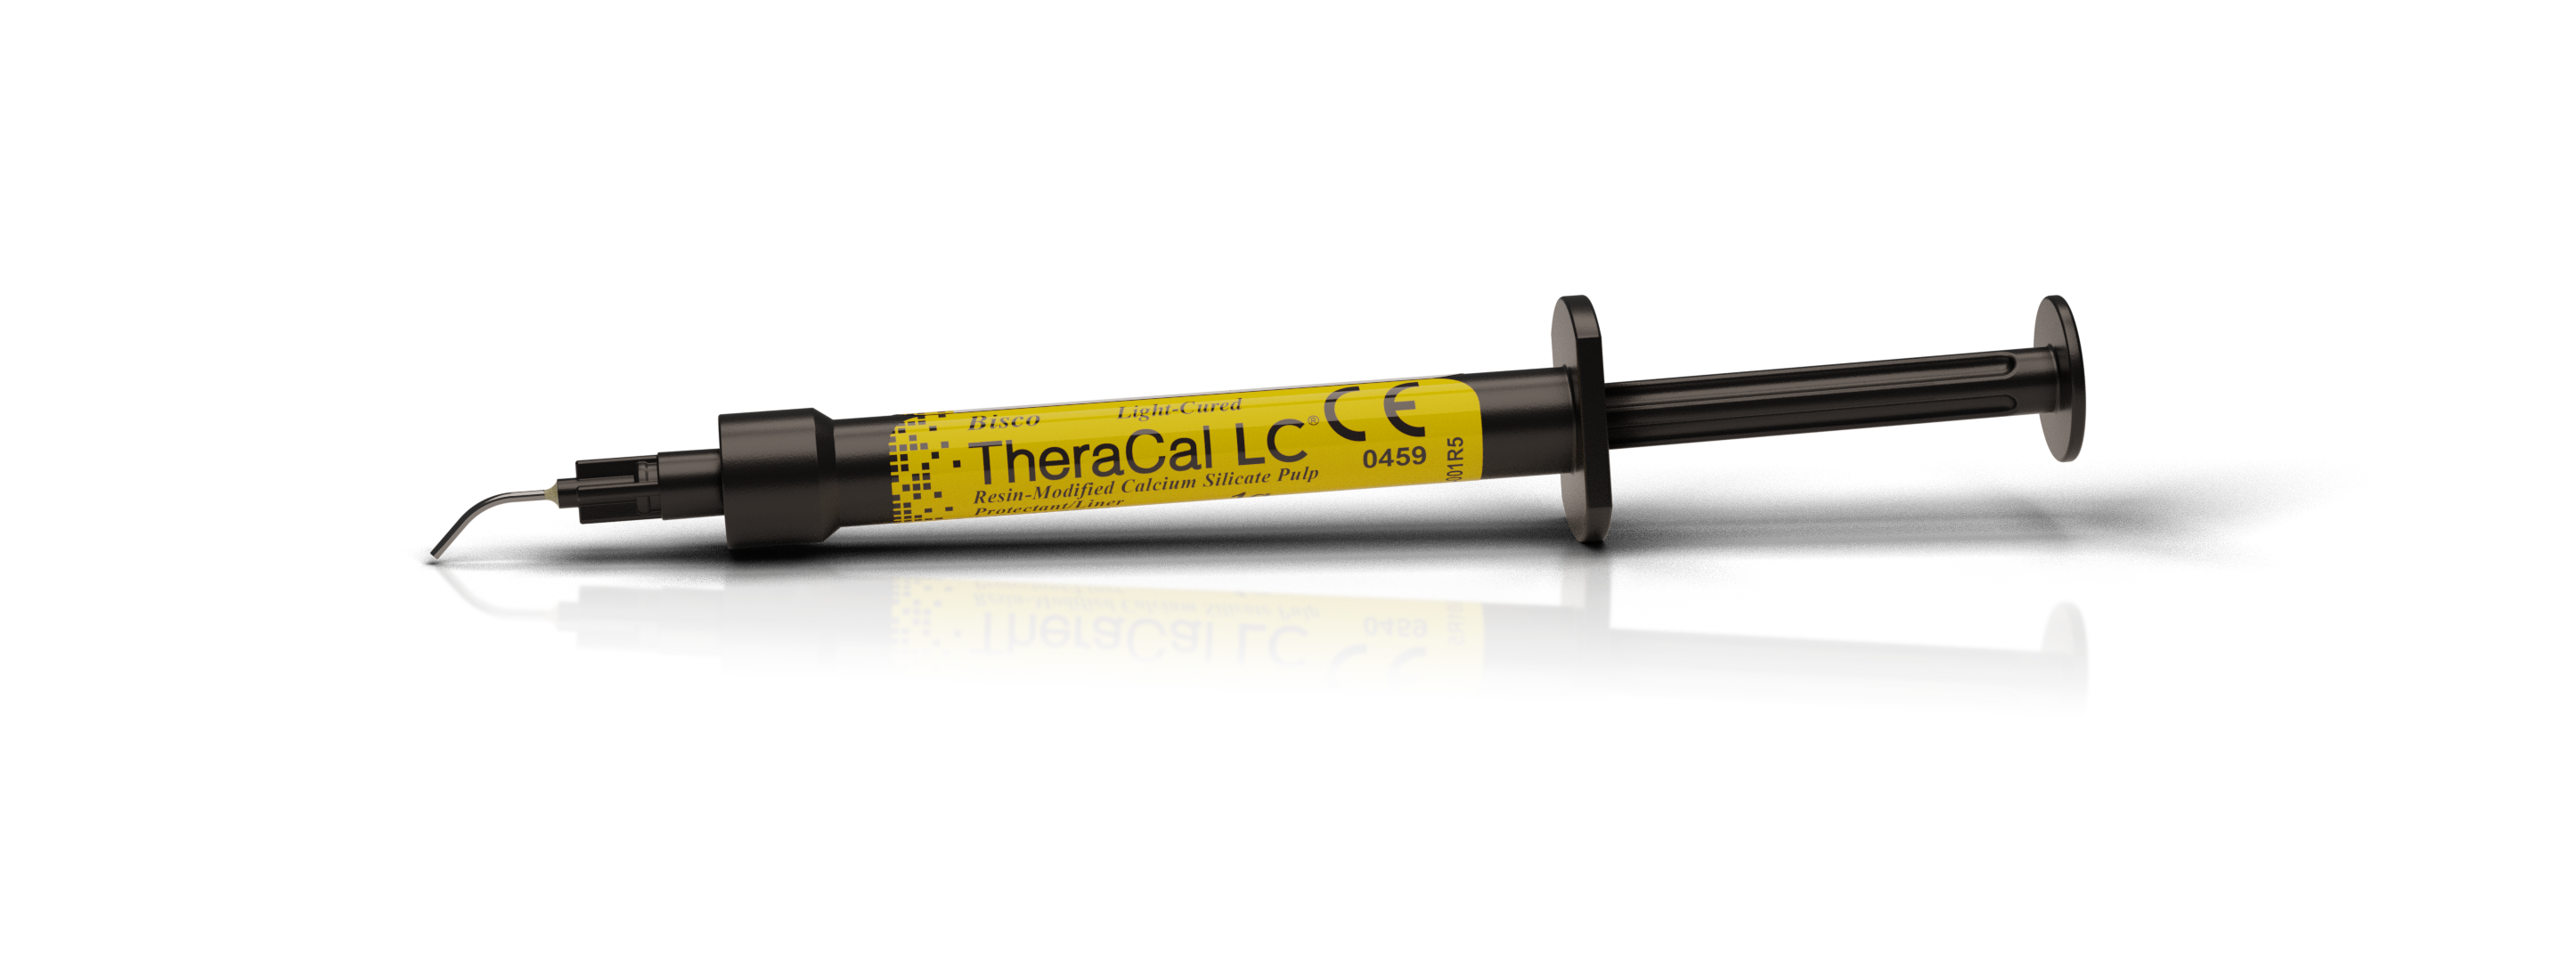 TheraCal LC_BISCO